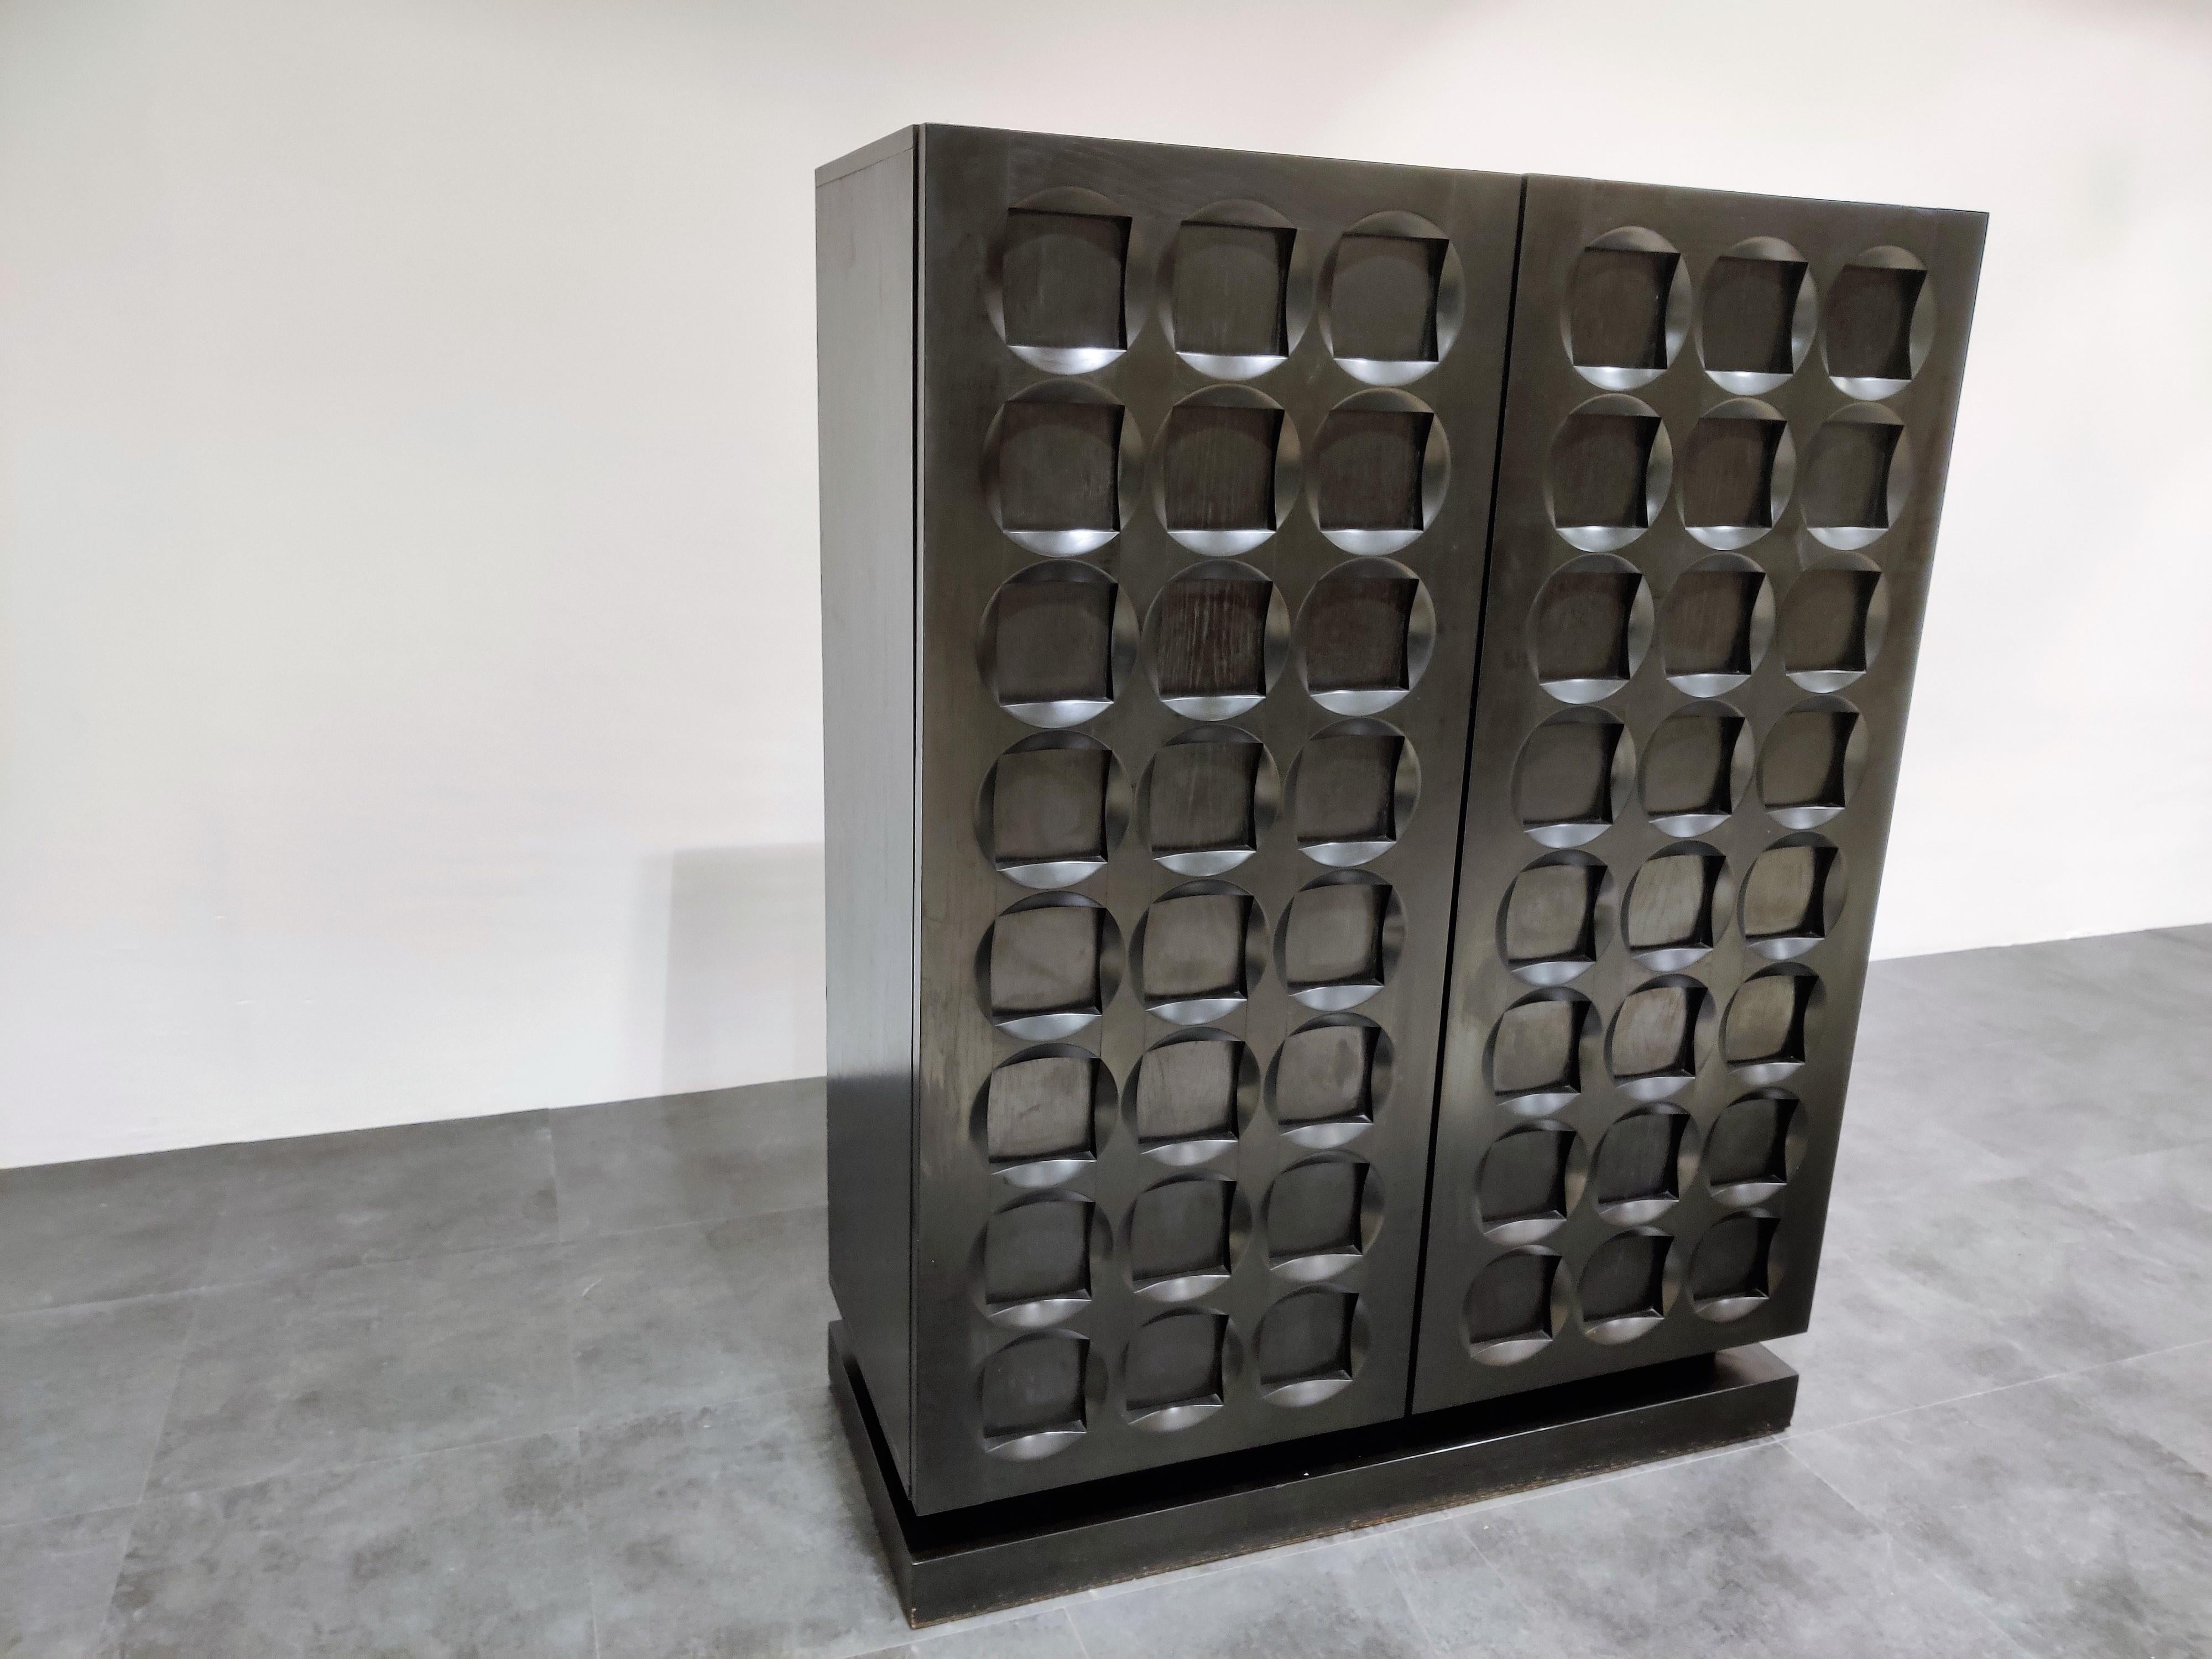 Beautiful black ebonized wooden Brutalist bar cabinet.

Stunning graphical design doors.

Contains a built in bottle holder.

Eye-catching and timeless piece.

Good condition.

1970s, Belgium

Dimensions:
Height 141cm/55.51